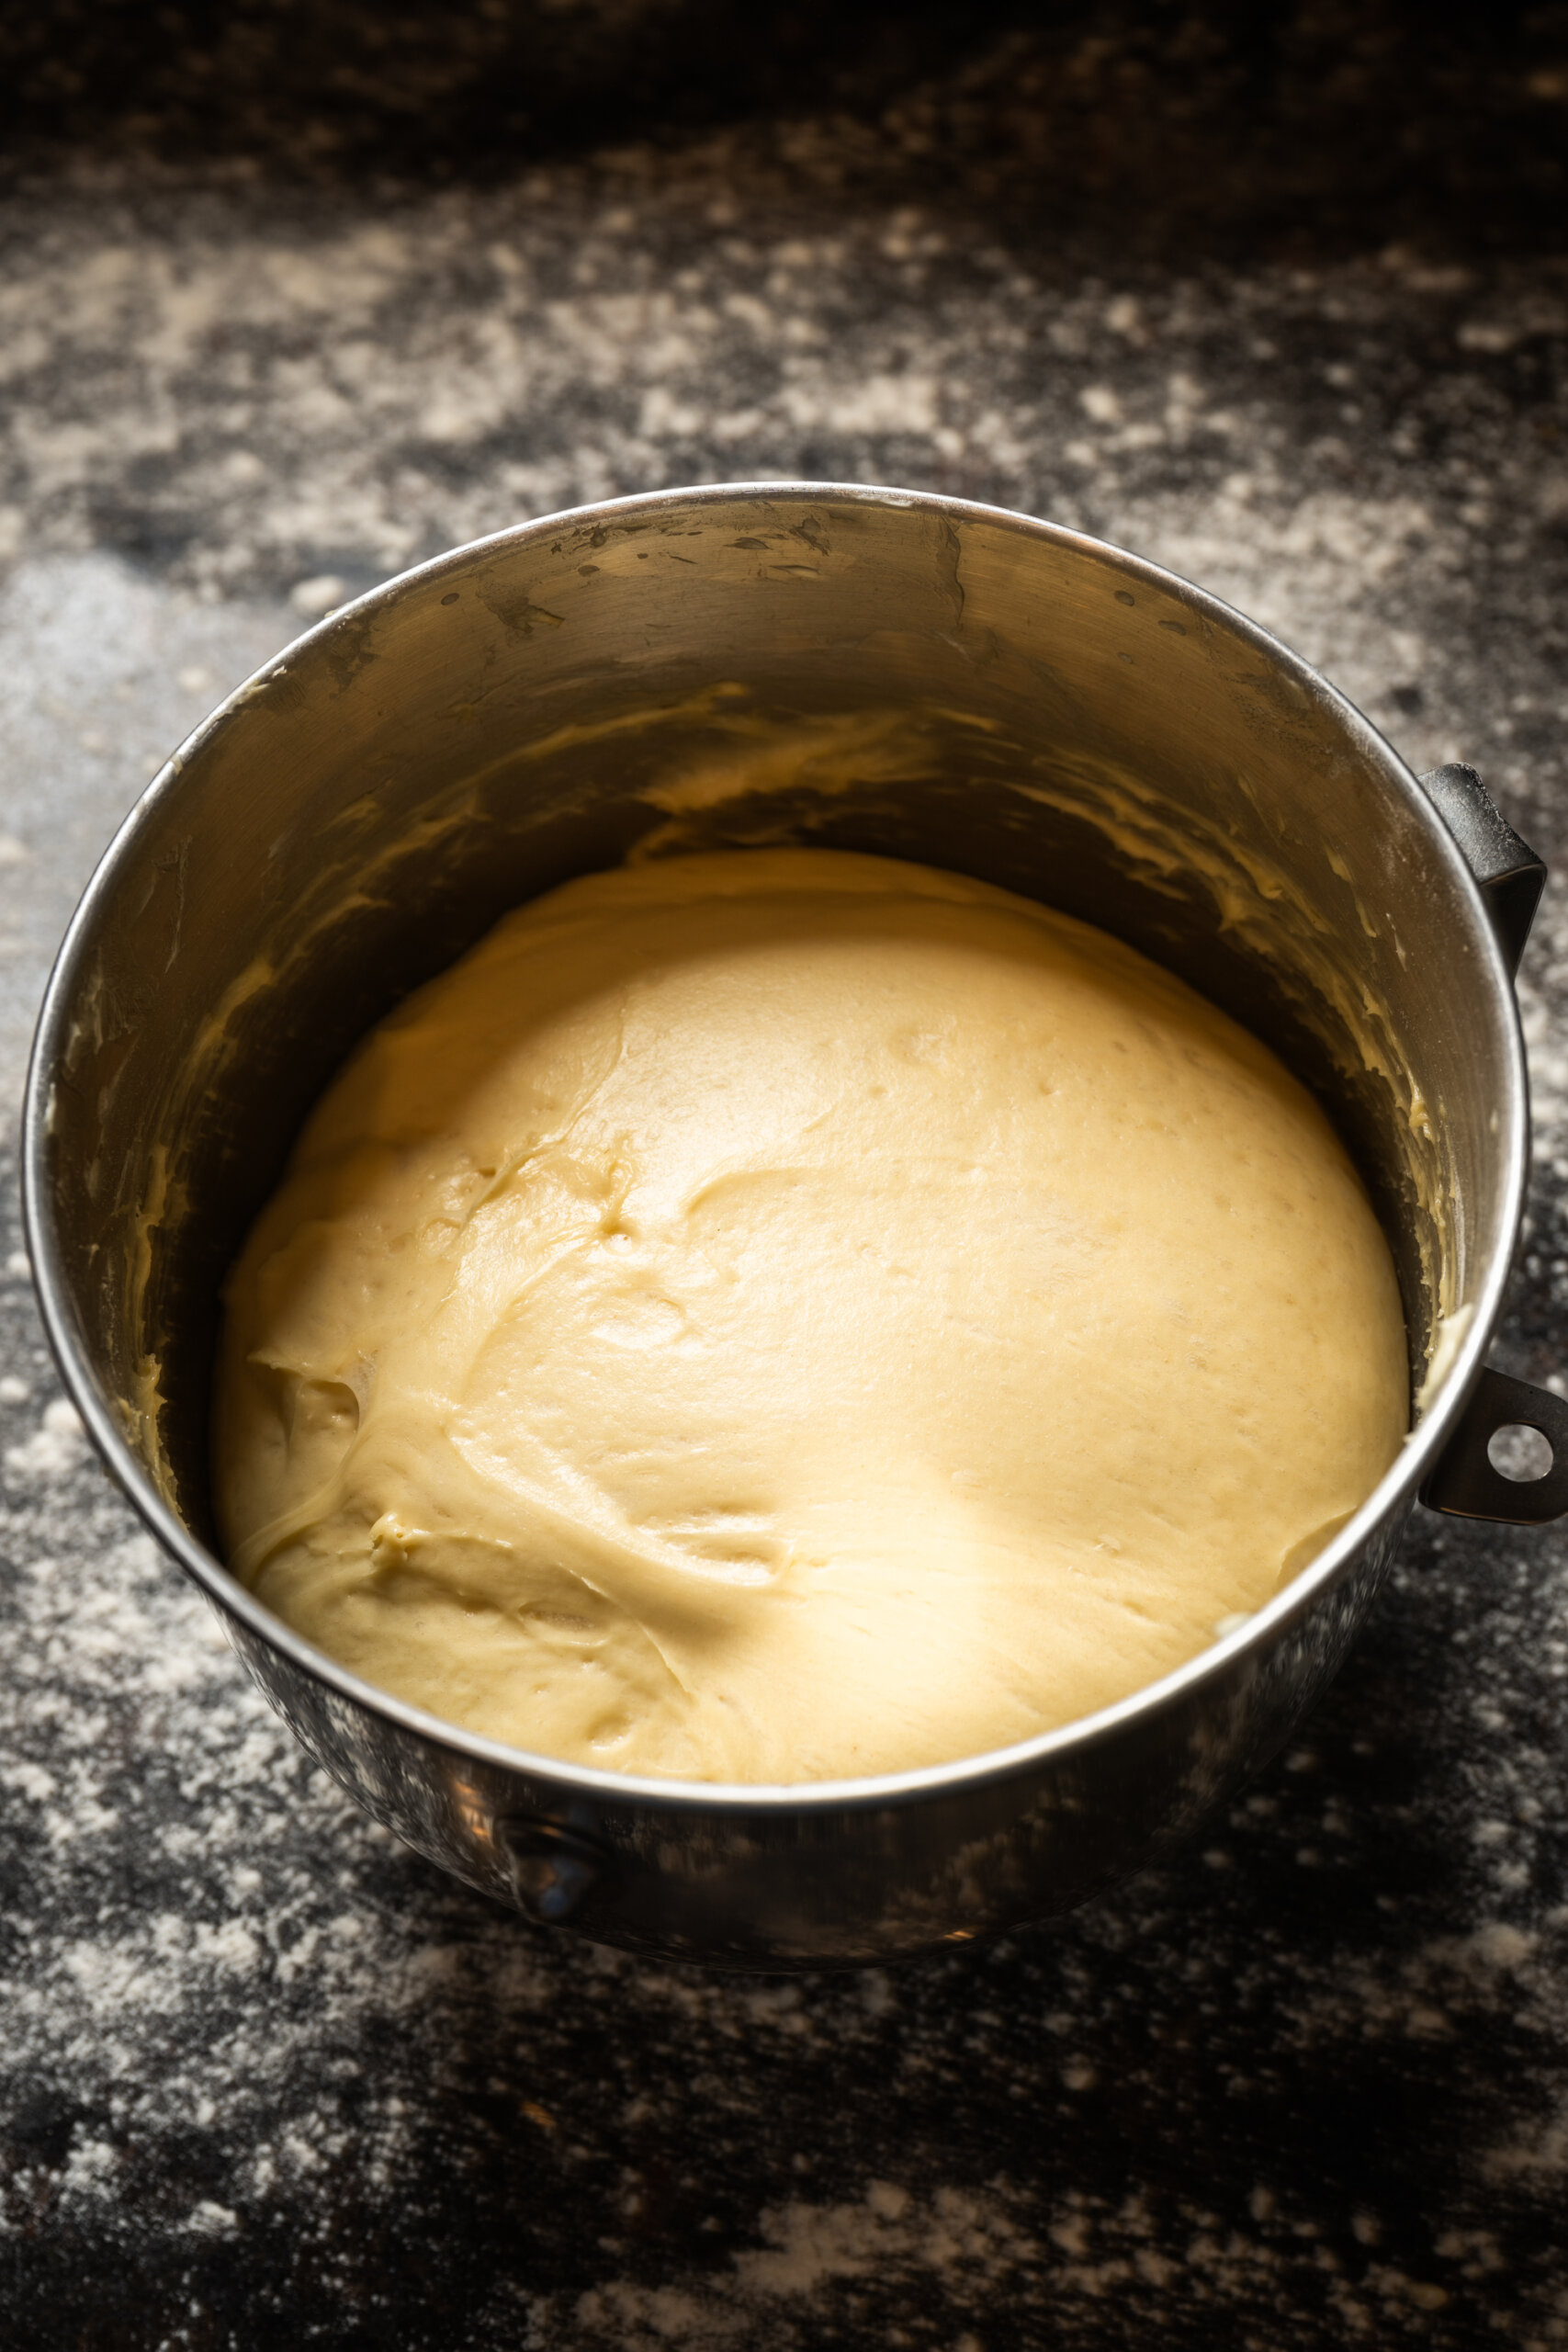 Yeasted dough rising in a mixer bowl for king cake